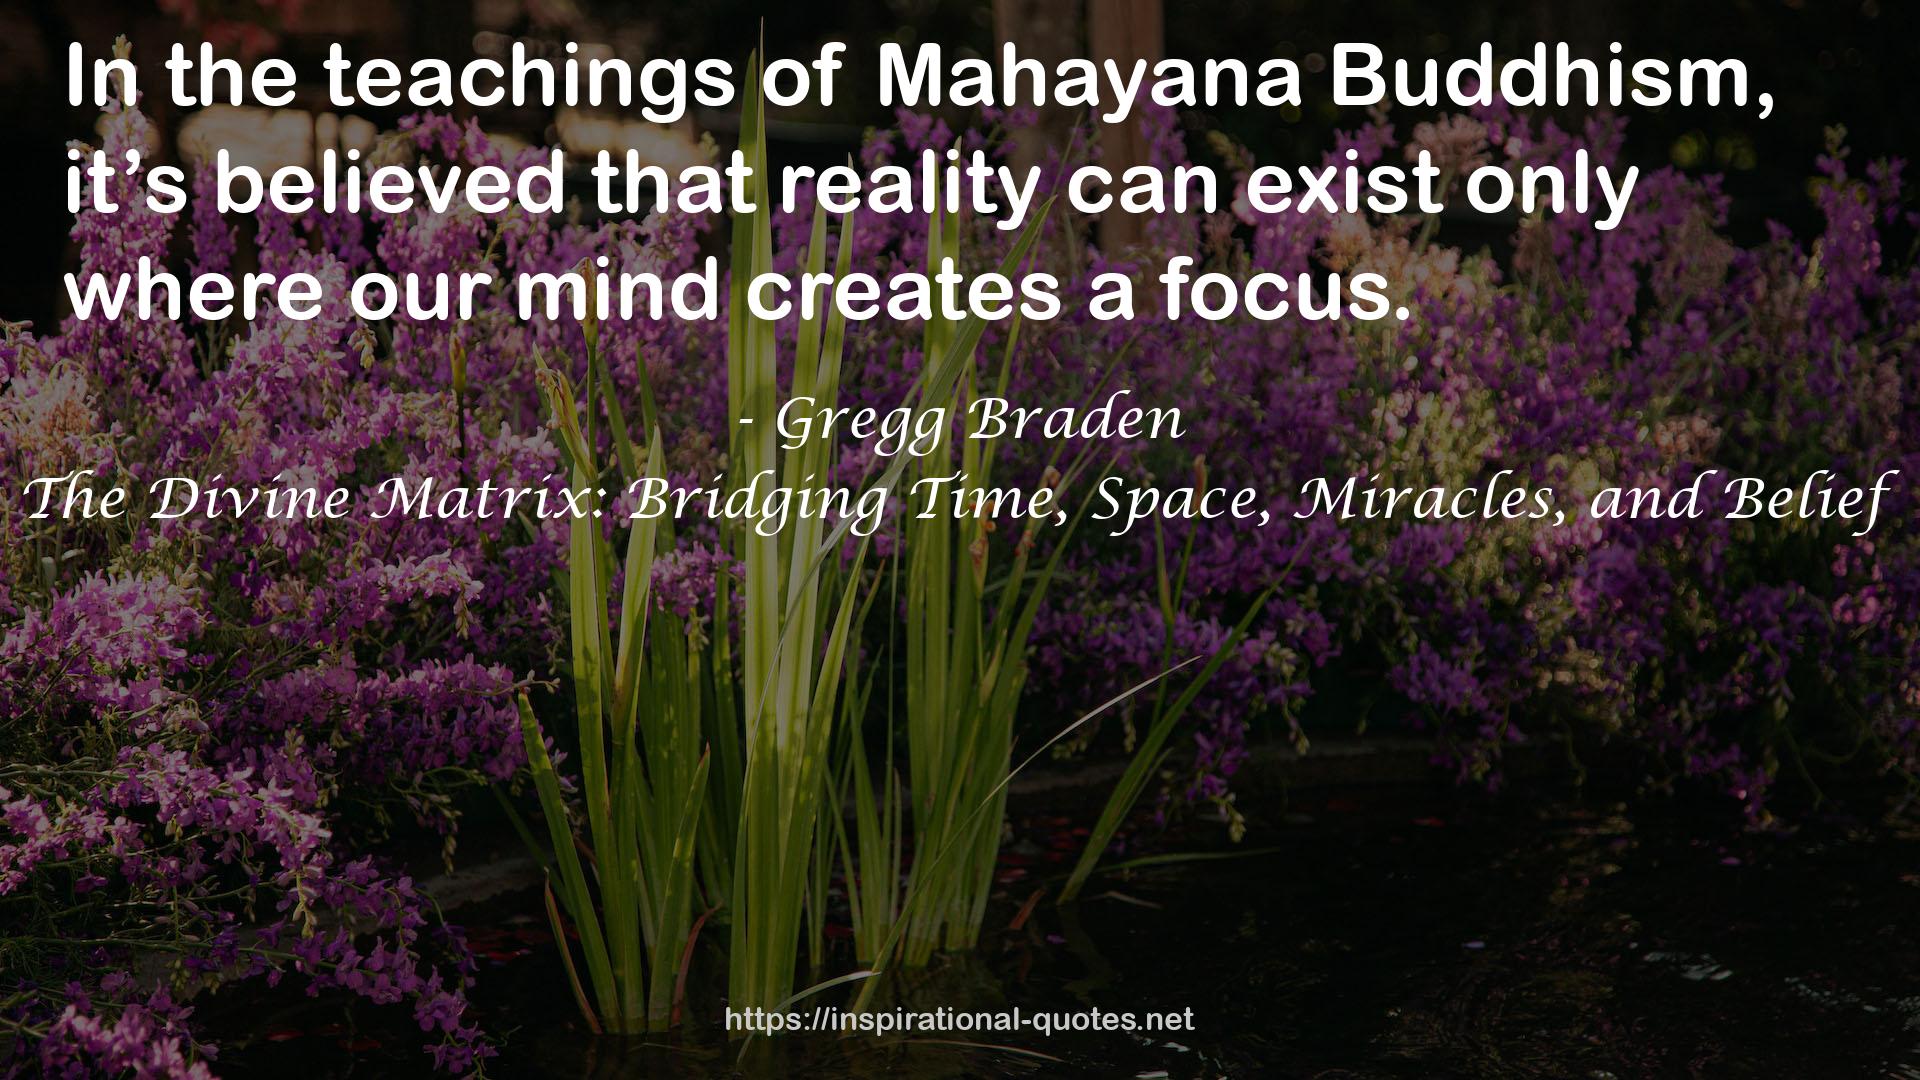 The Divine Matrix: Bridging Time, Space, Miracles, and Belief QUOTES